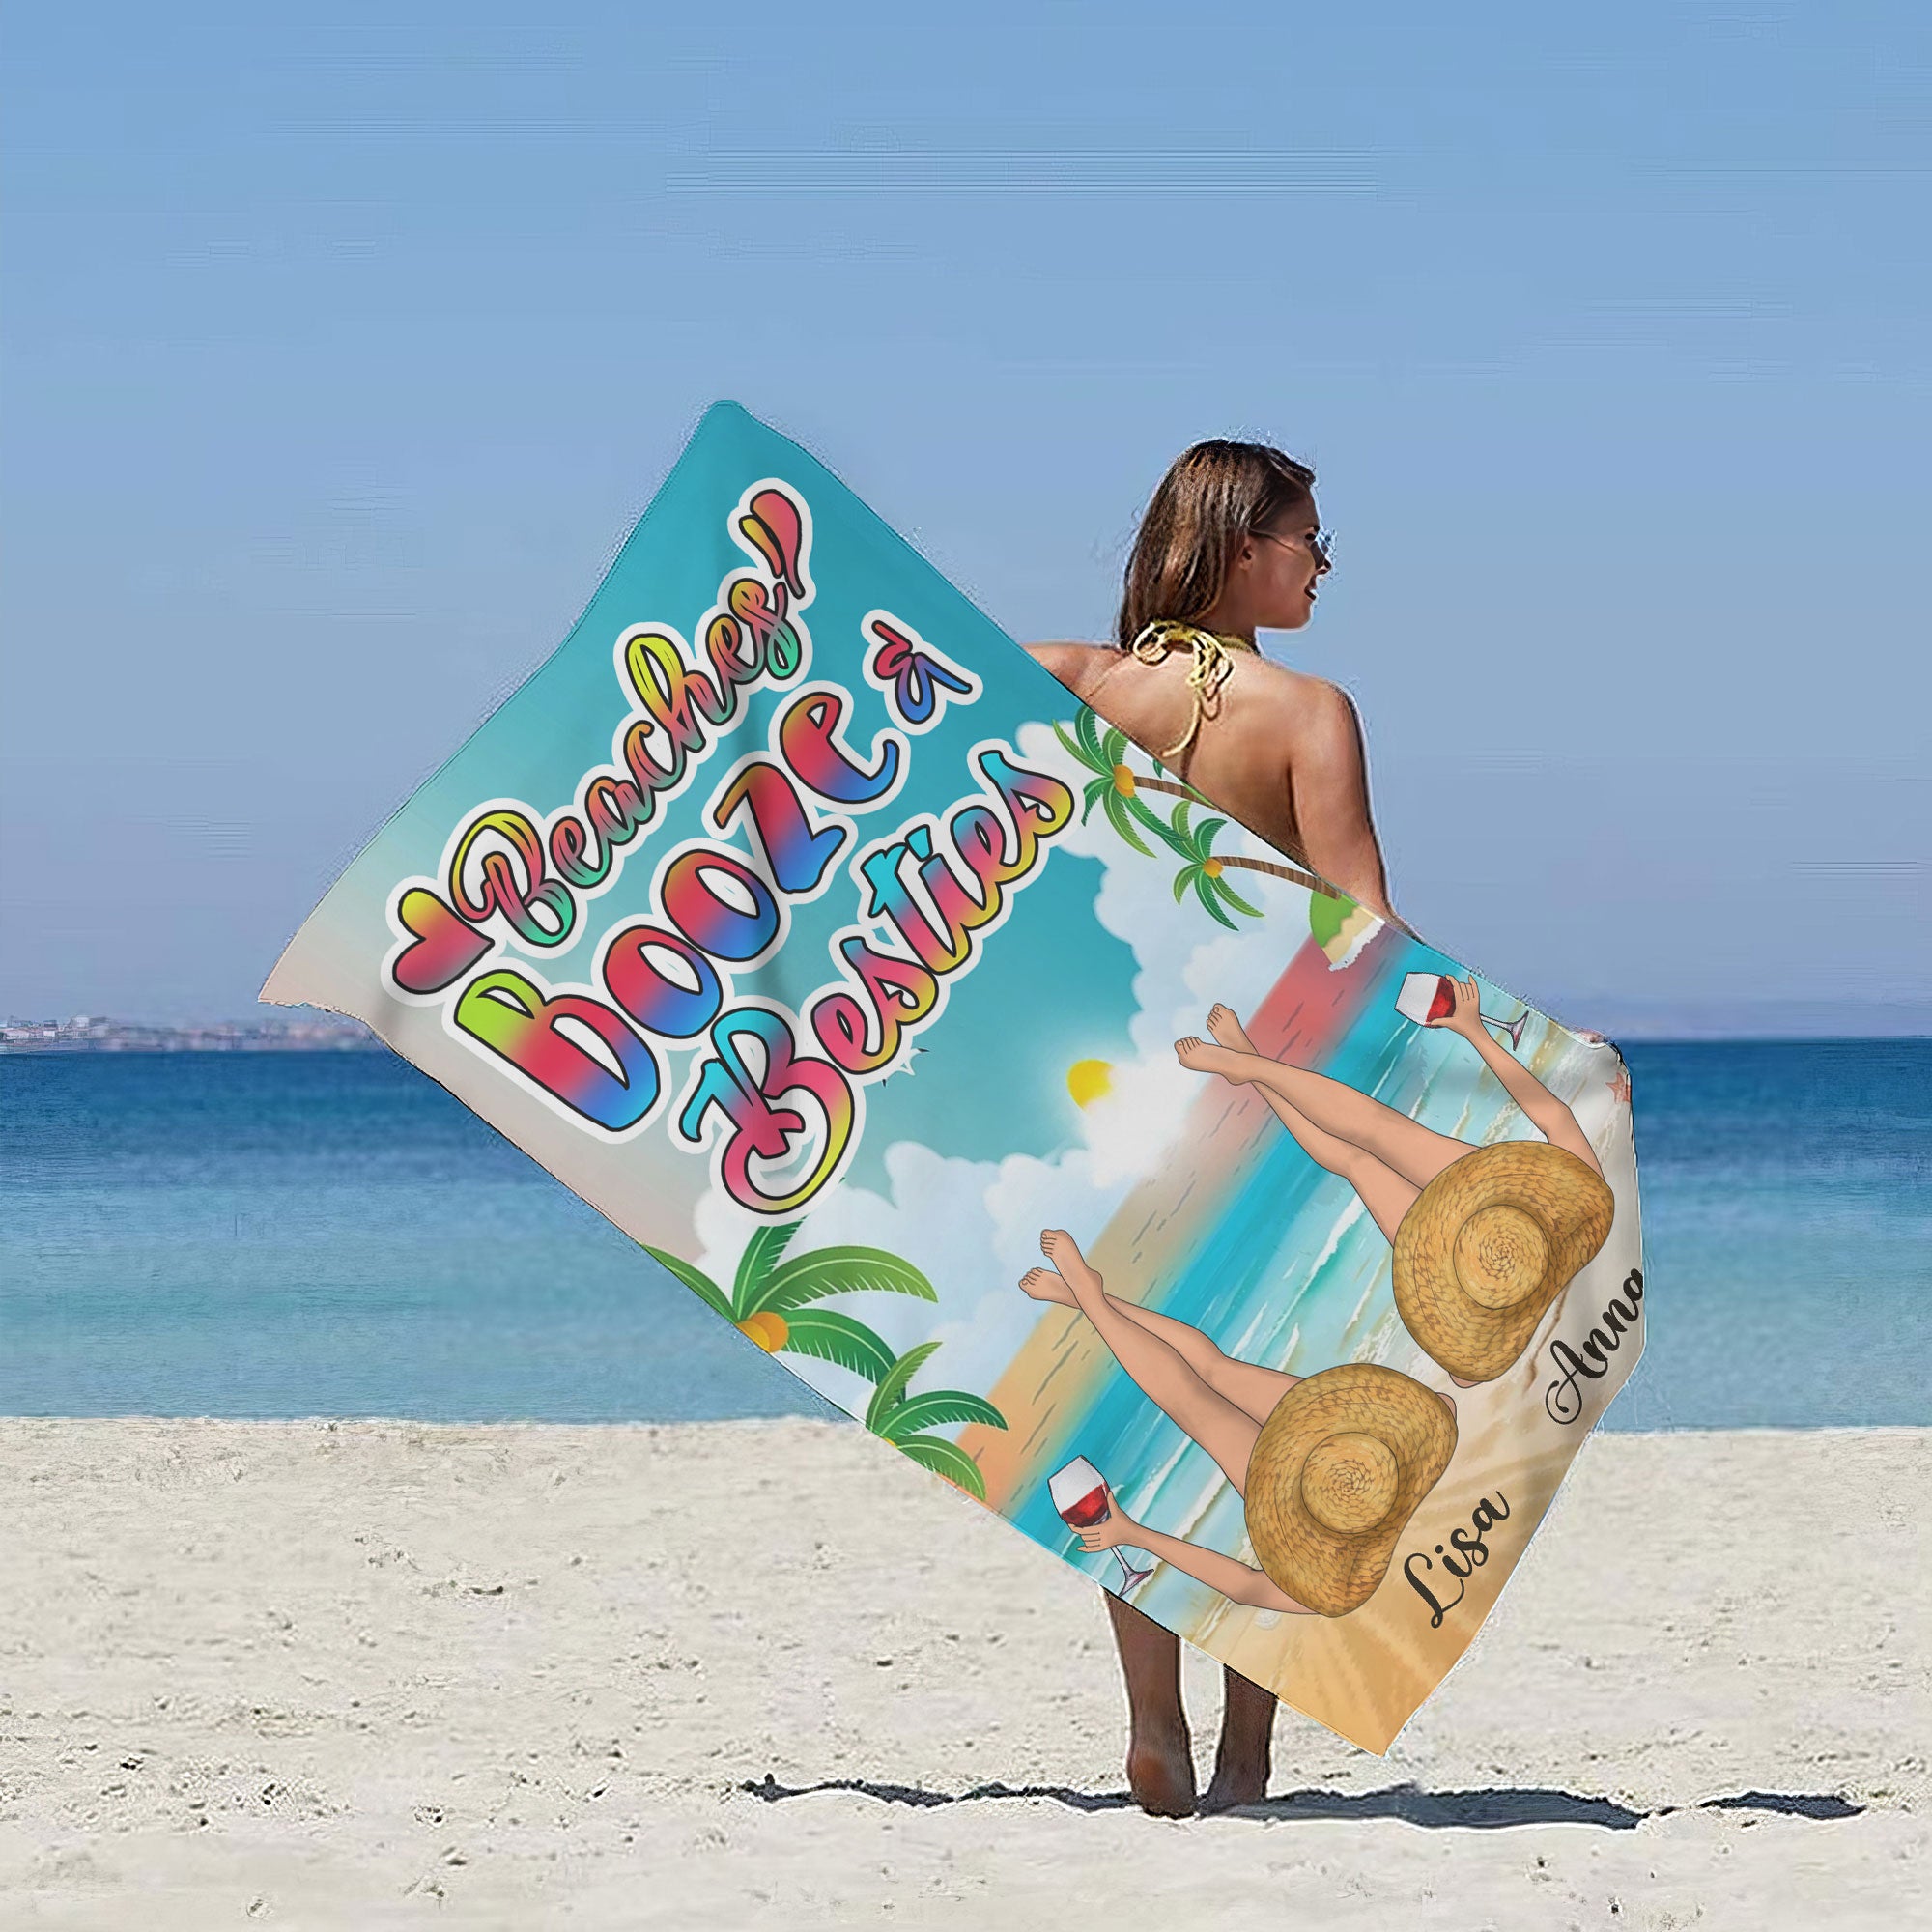 Make Waves with Personalized Custom Beach Towels - Your Beach Adventure! Stand Out in the Sand and Make a Splash with Custom-Crafted Beach Towels!